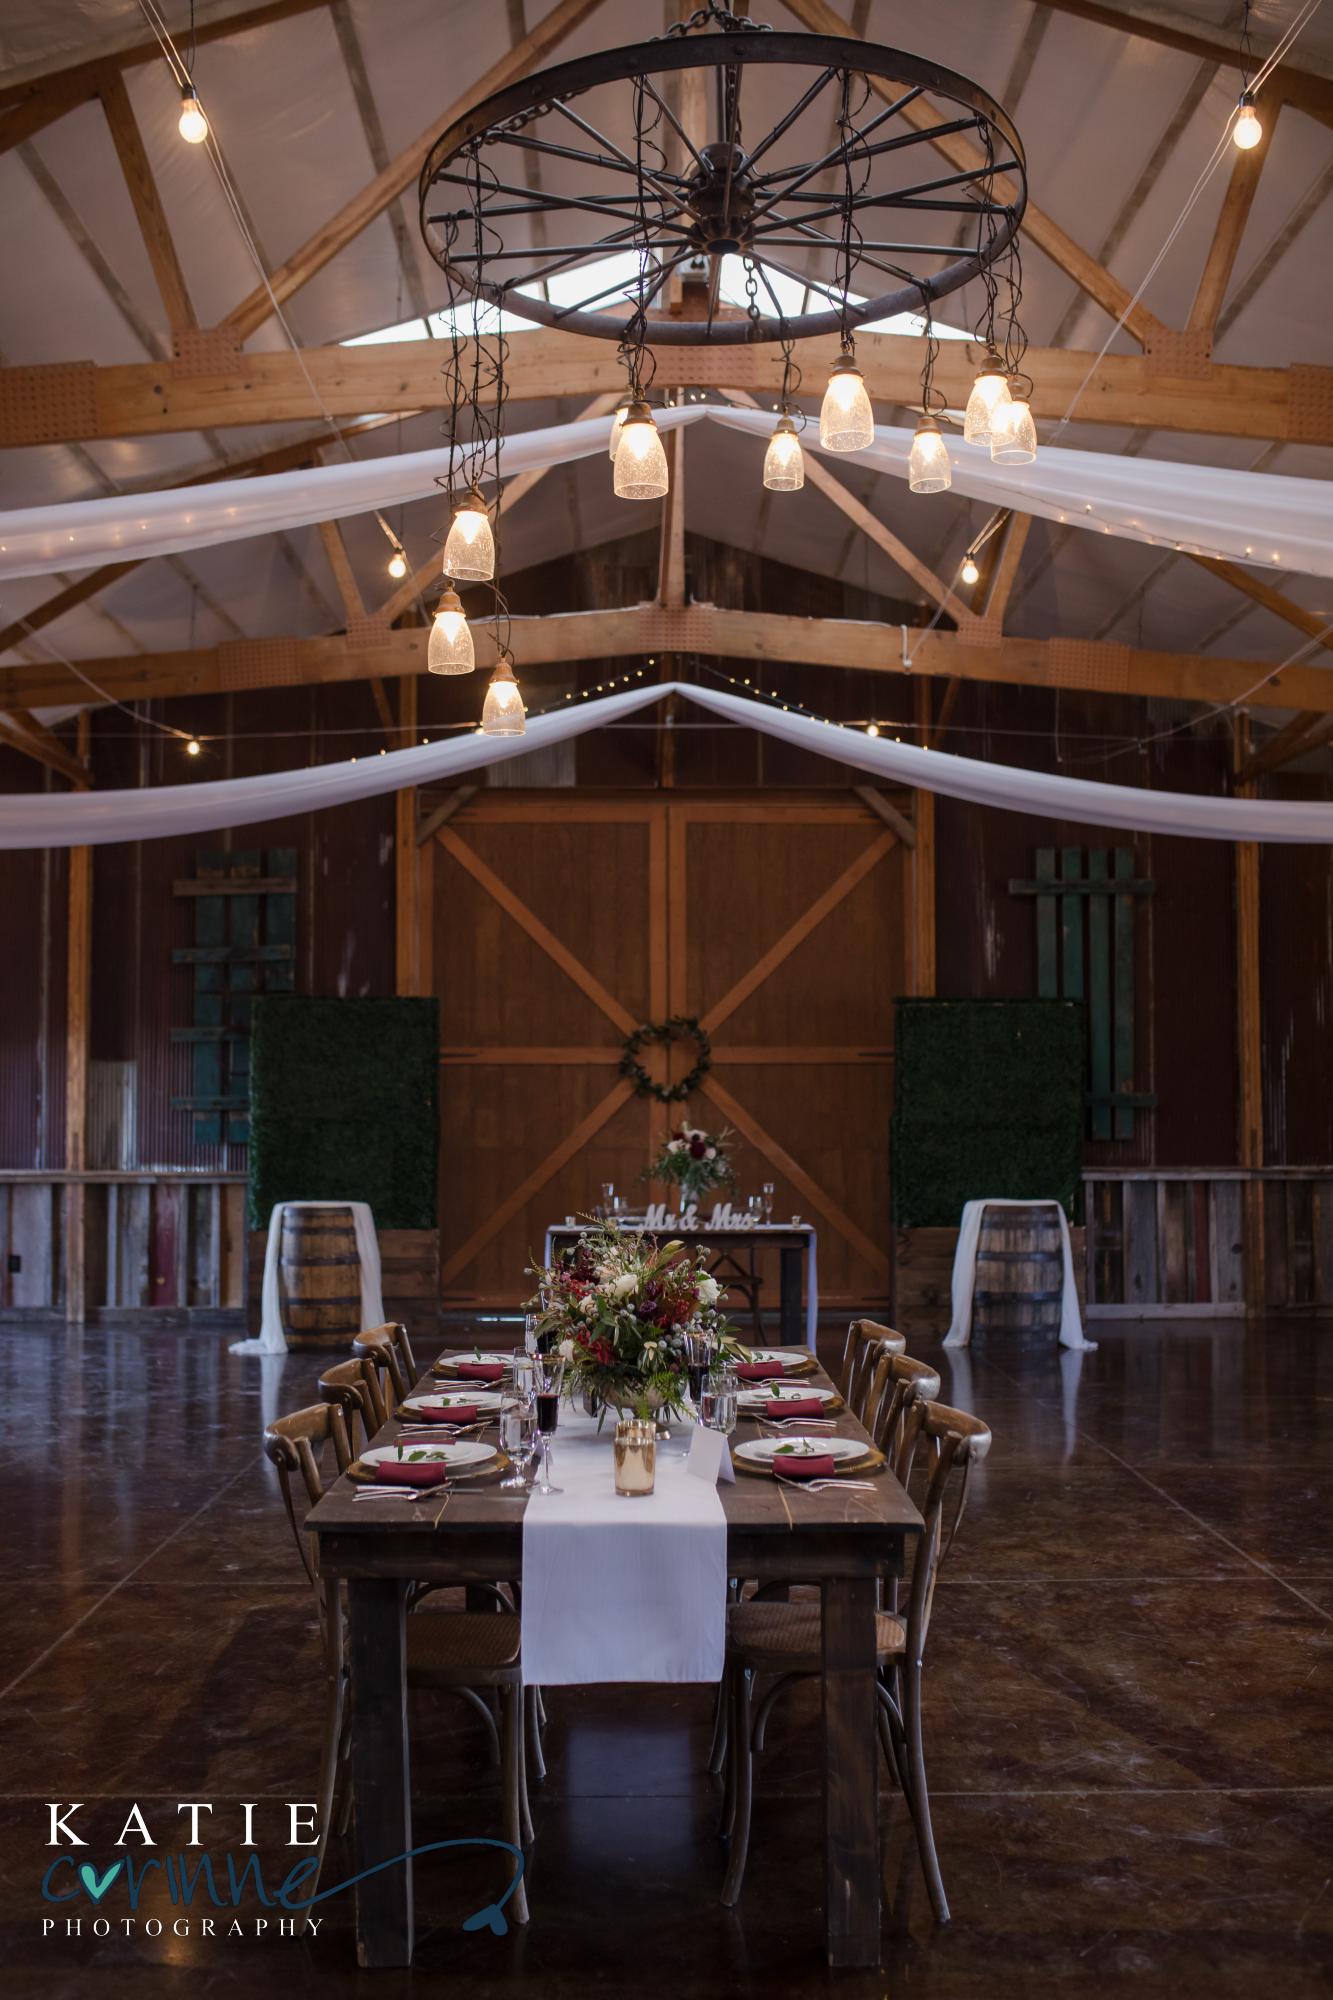 Decorated wedding venue for styled shoot